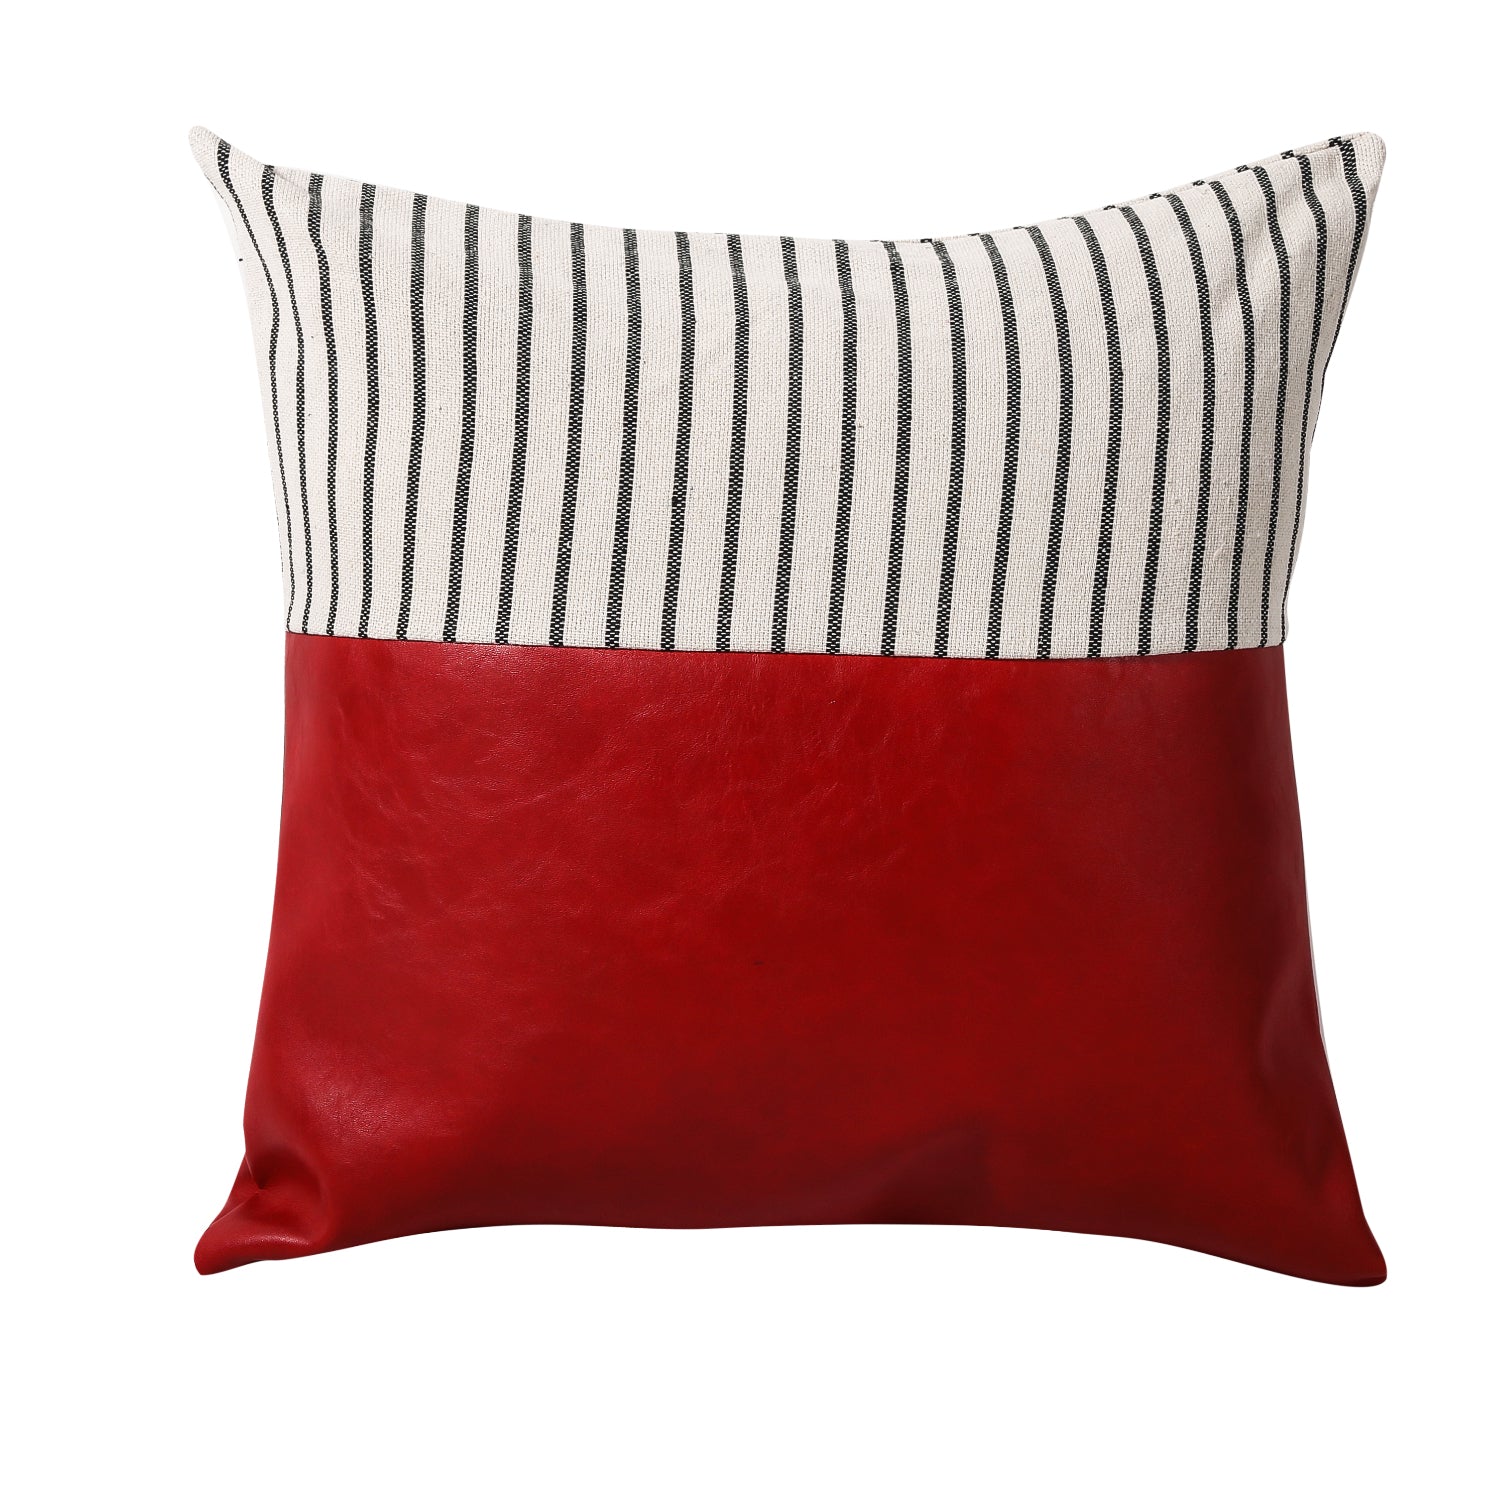 Faux Leather and Cotton Linen Decorative Throw Pillow Covers with Stripes